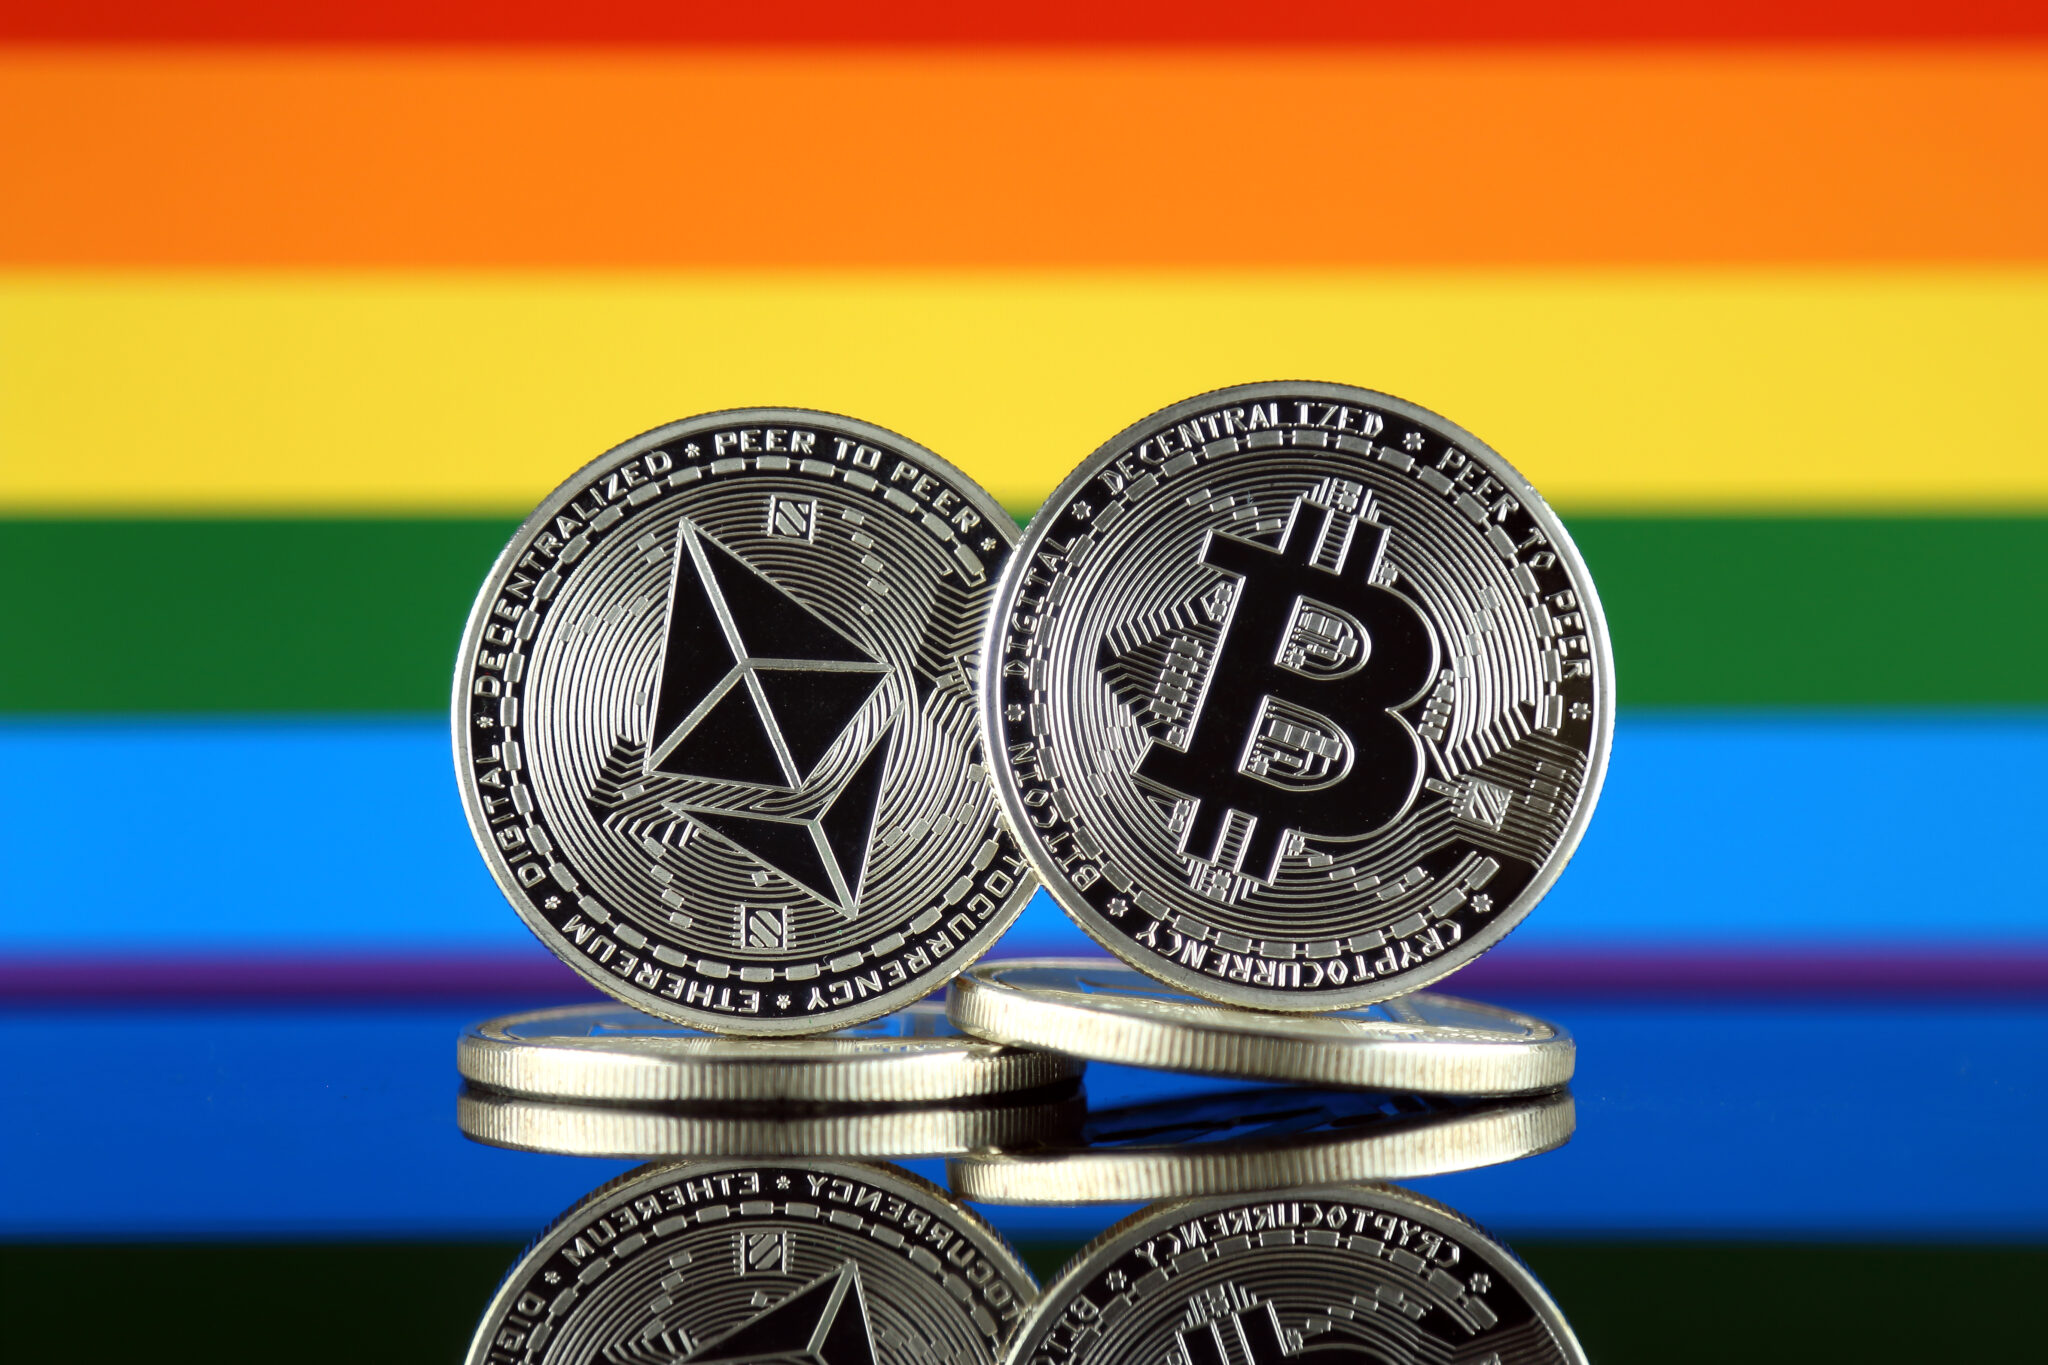 Physical version of Ethereum (ETH), Bitcoin (BTC) and Rainbow Flag. 2 largest cryptocurrencies in terms of market capitalization.